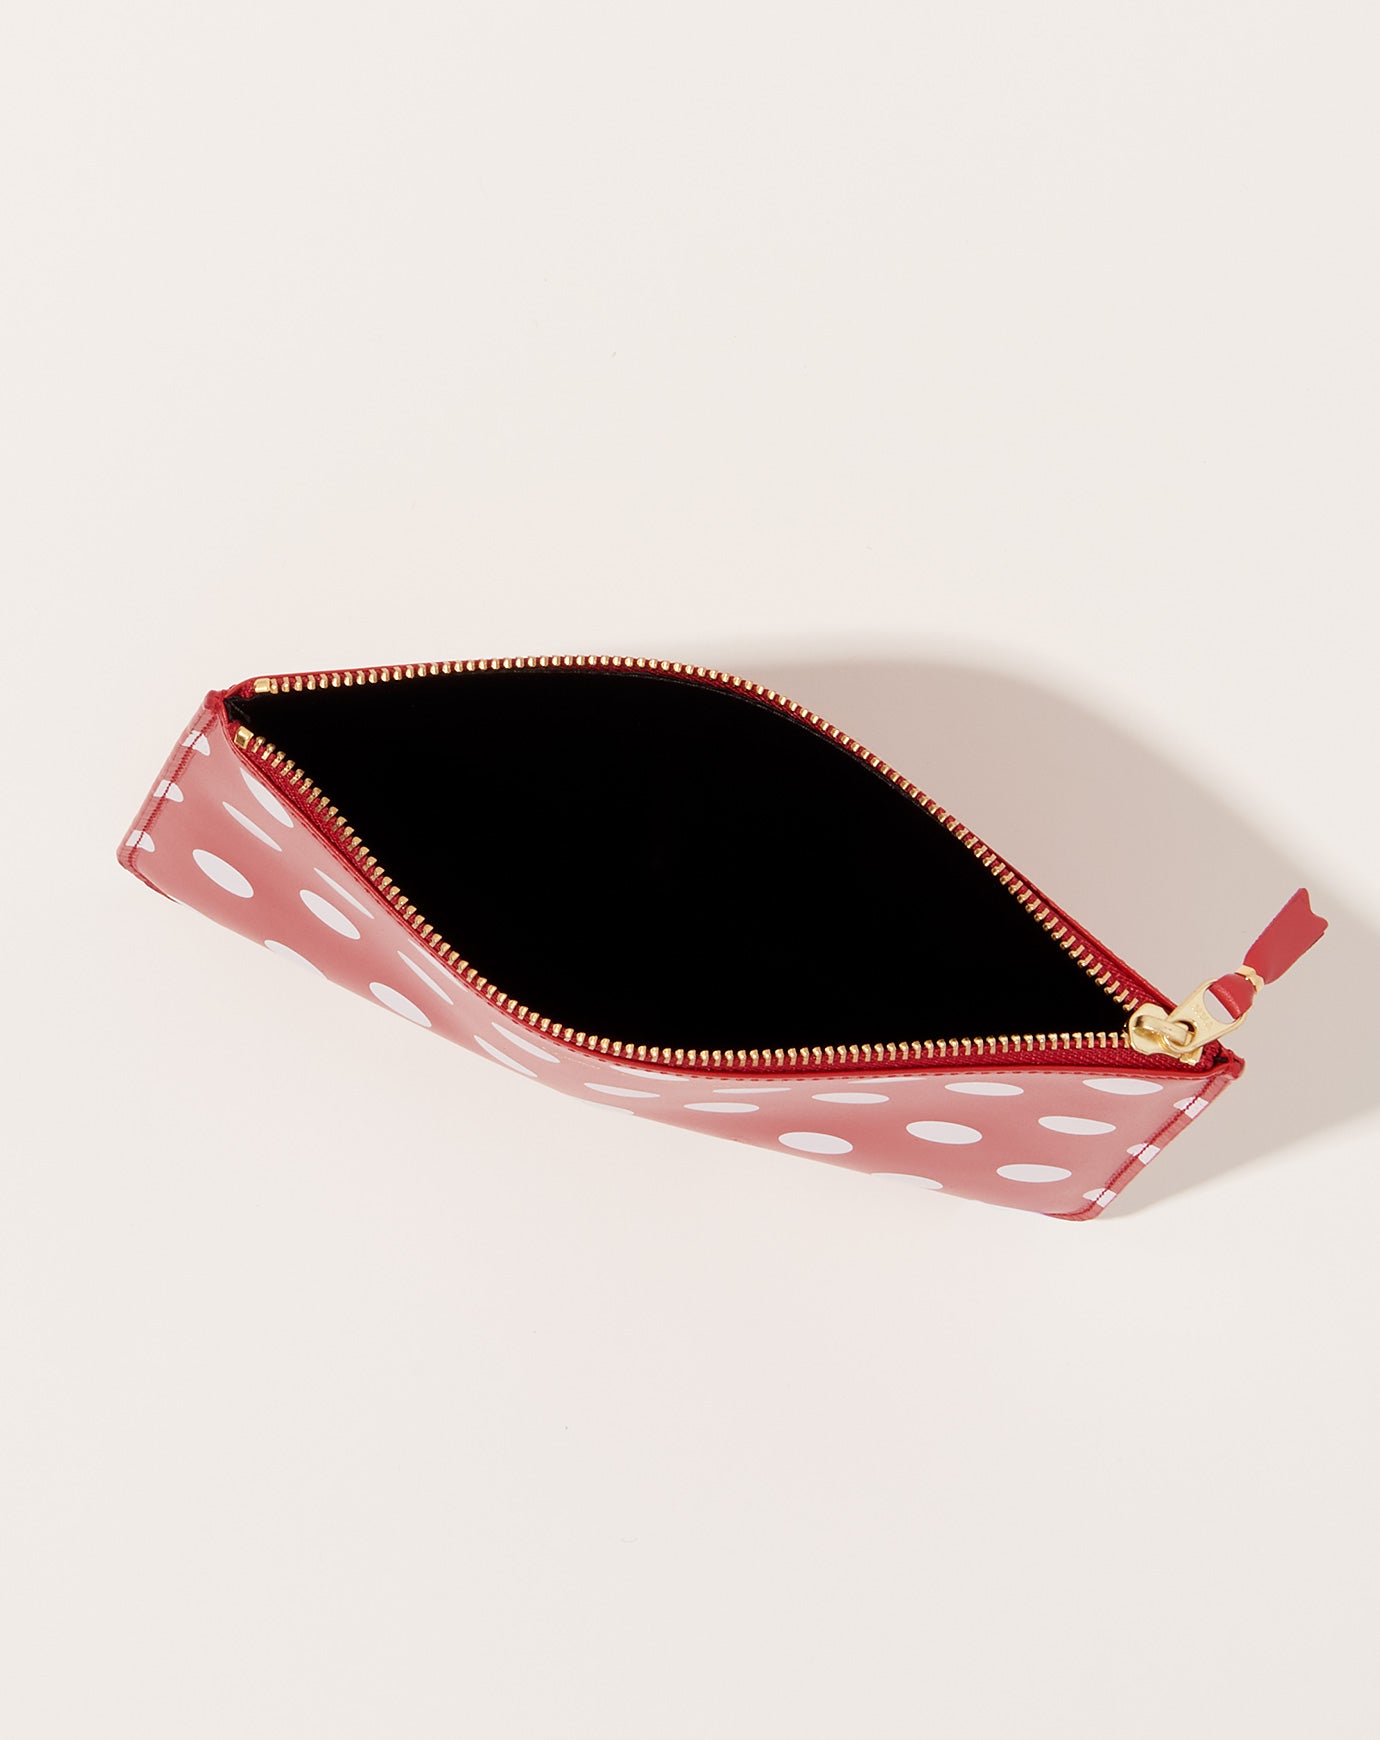 Comme des Garçons  Polka Dots Printed Wallet Pouch in Red